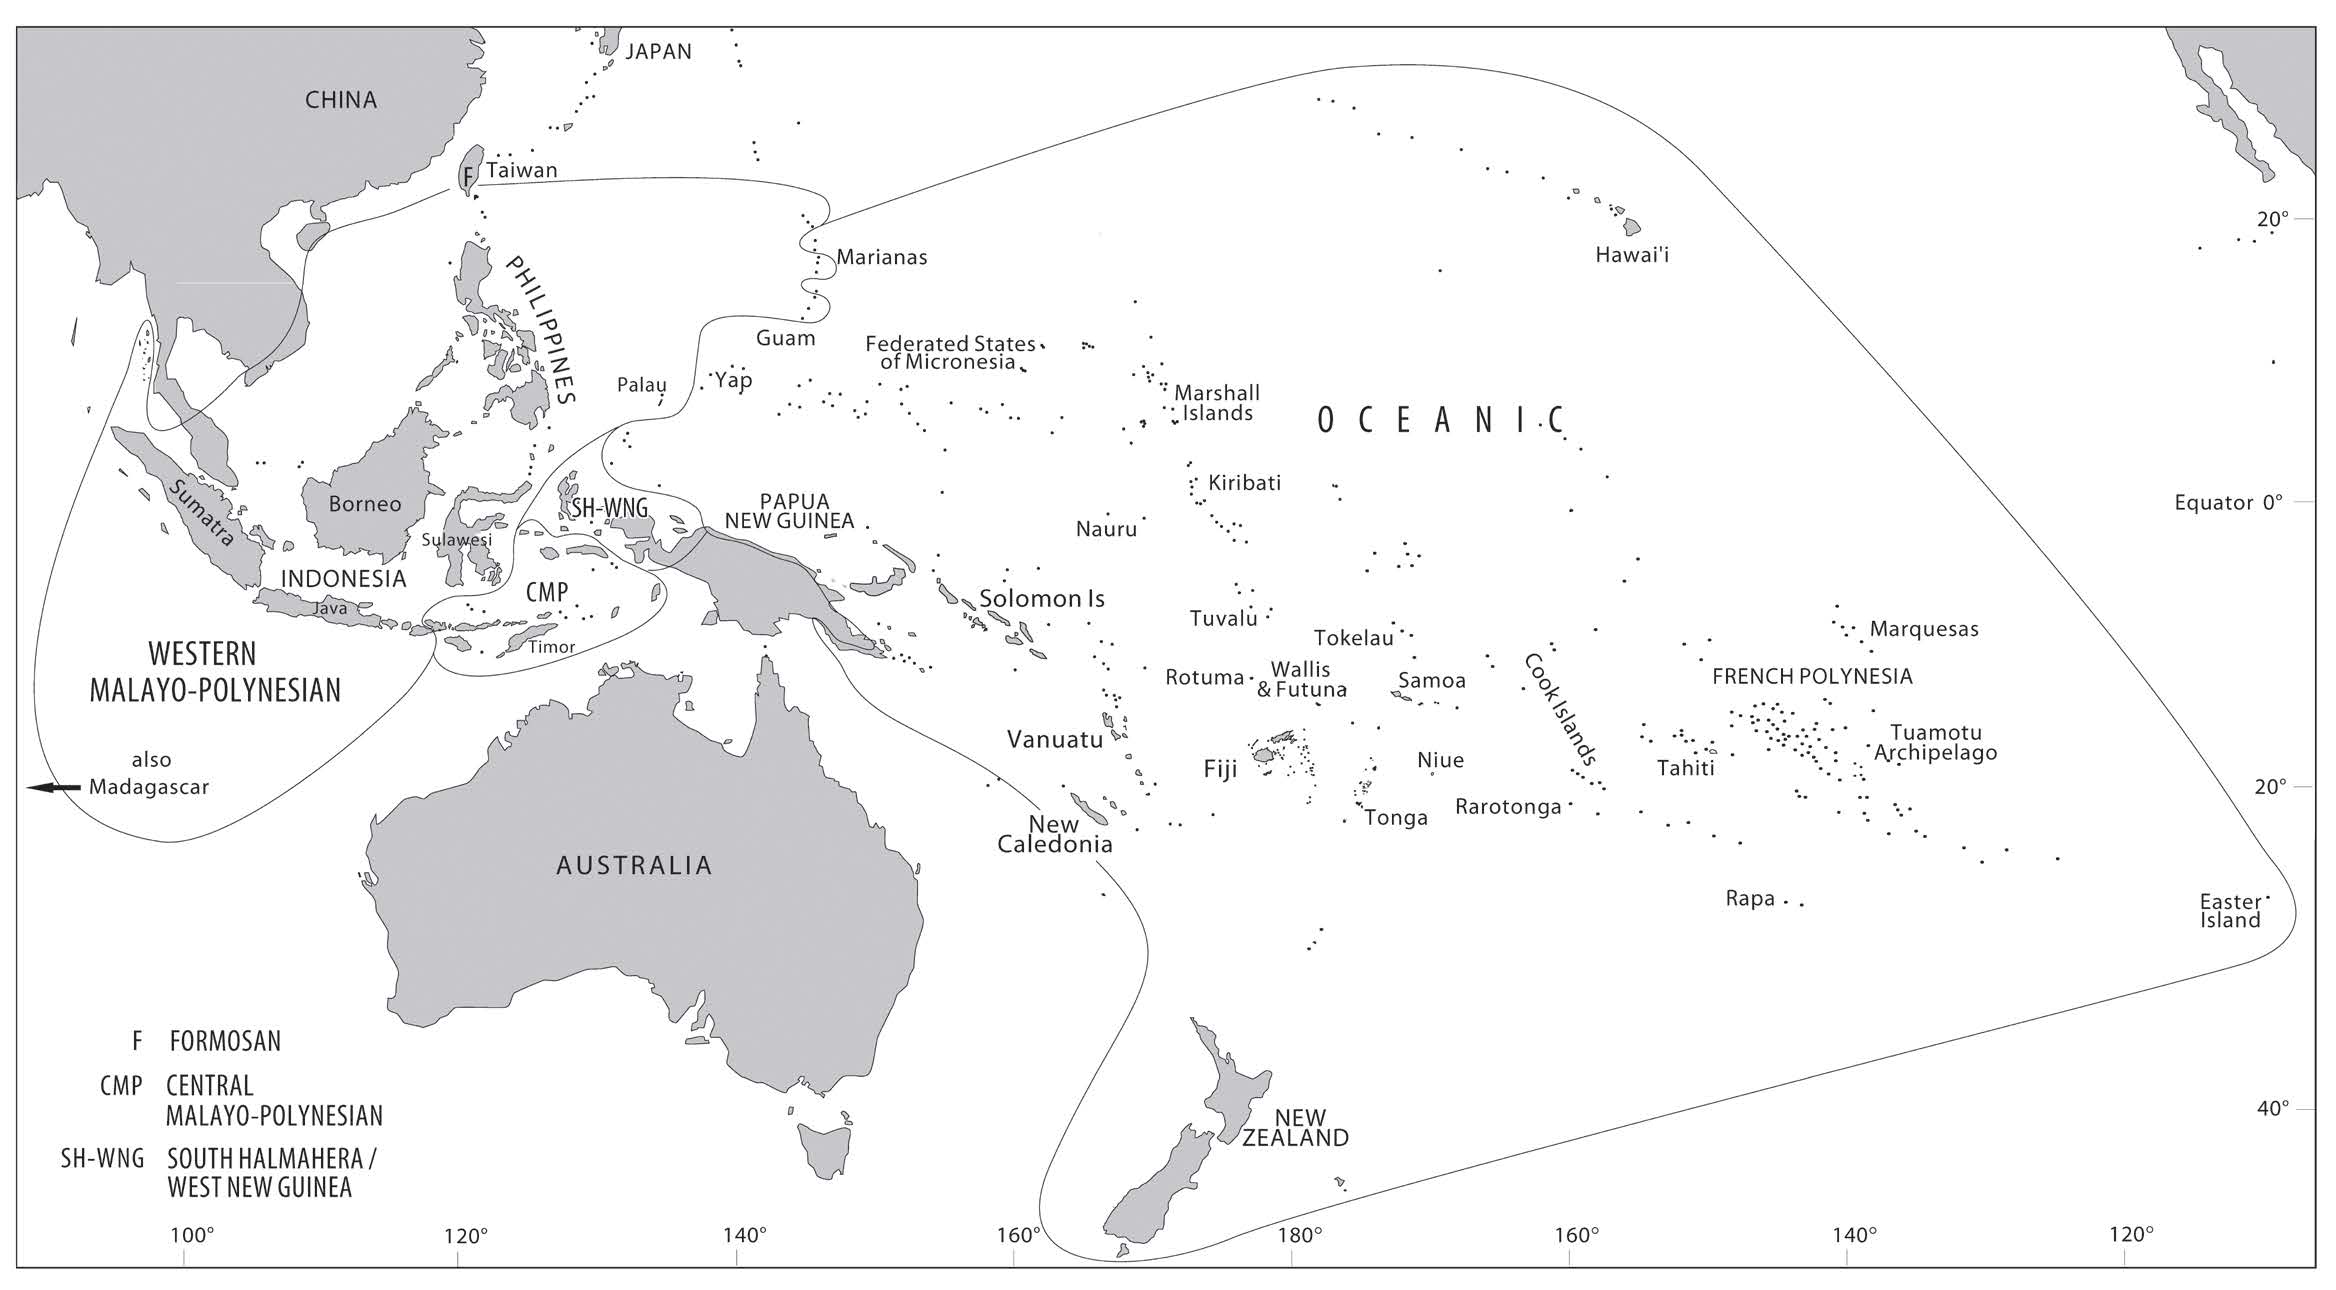 map of the oceanic and pacific ocean